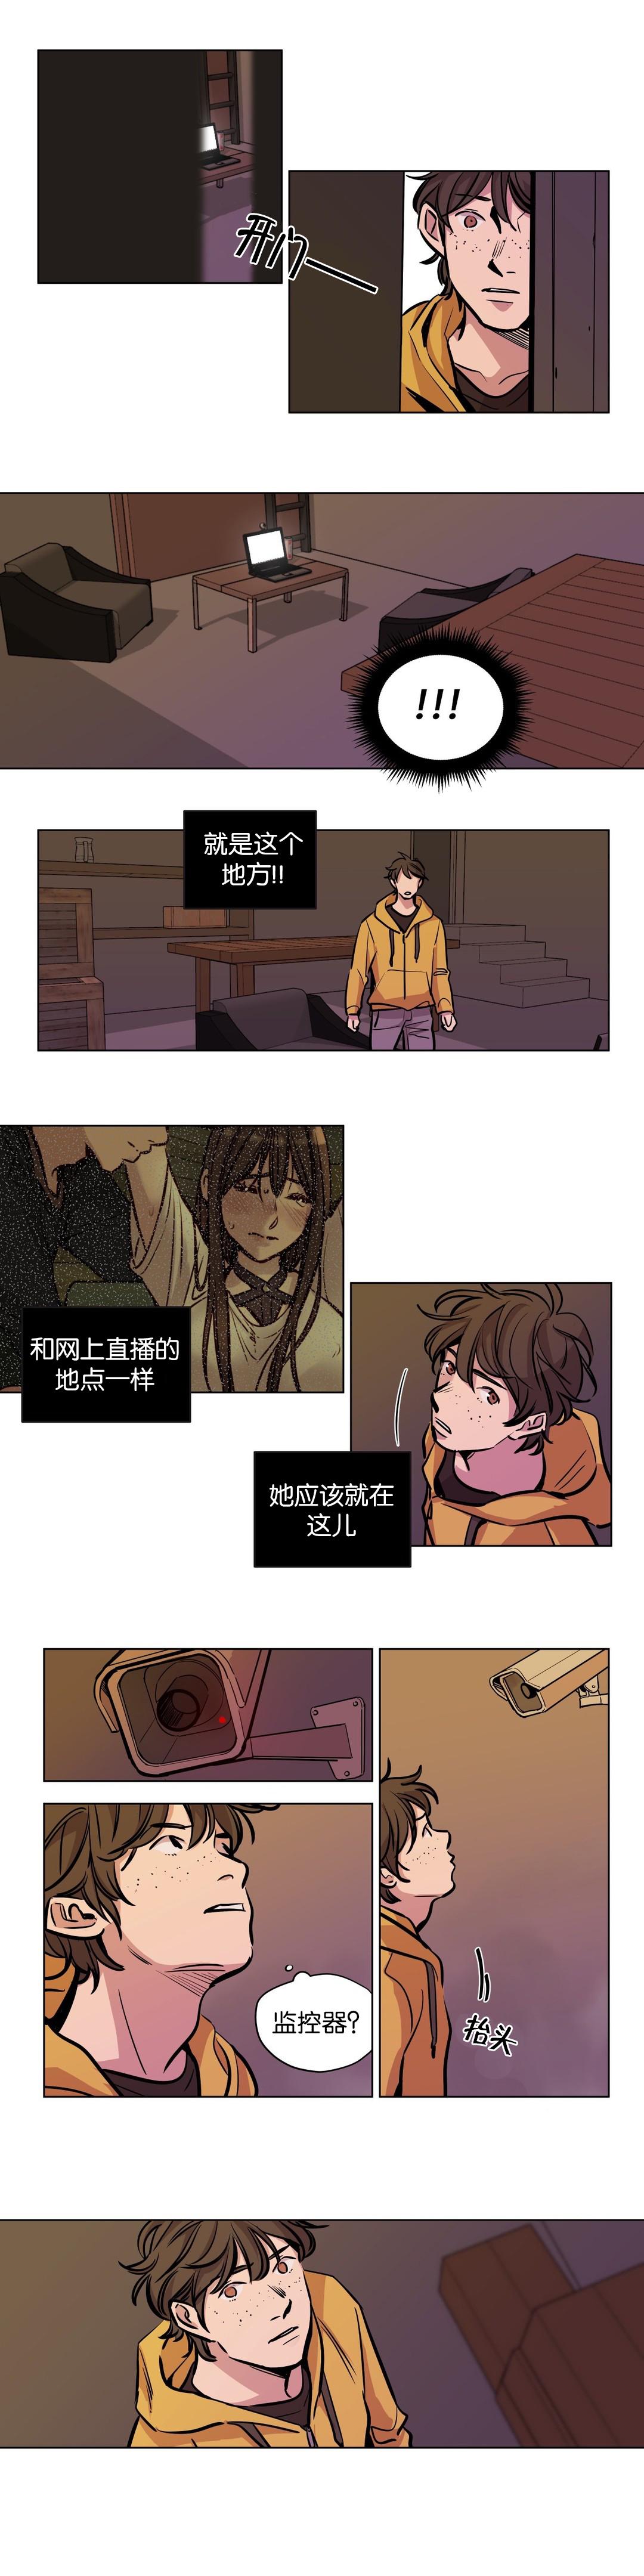 [Ramjak] 赎罪营(Atonement Camp) Ch.50-51 (Chinese) 14